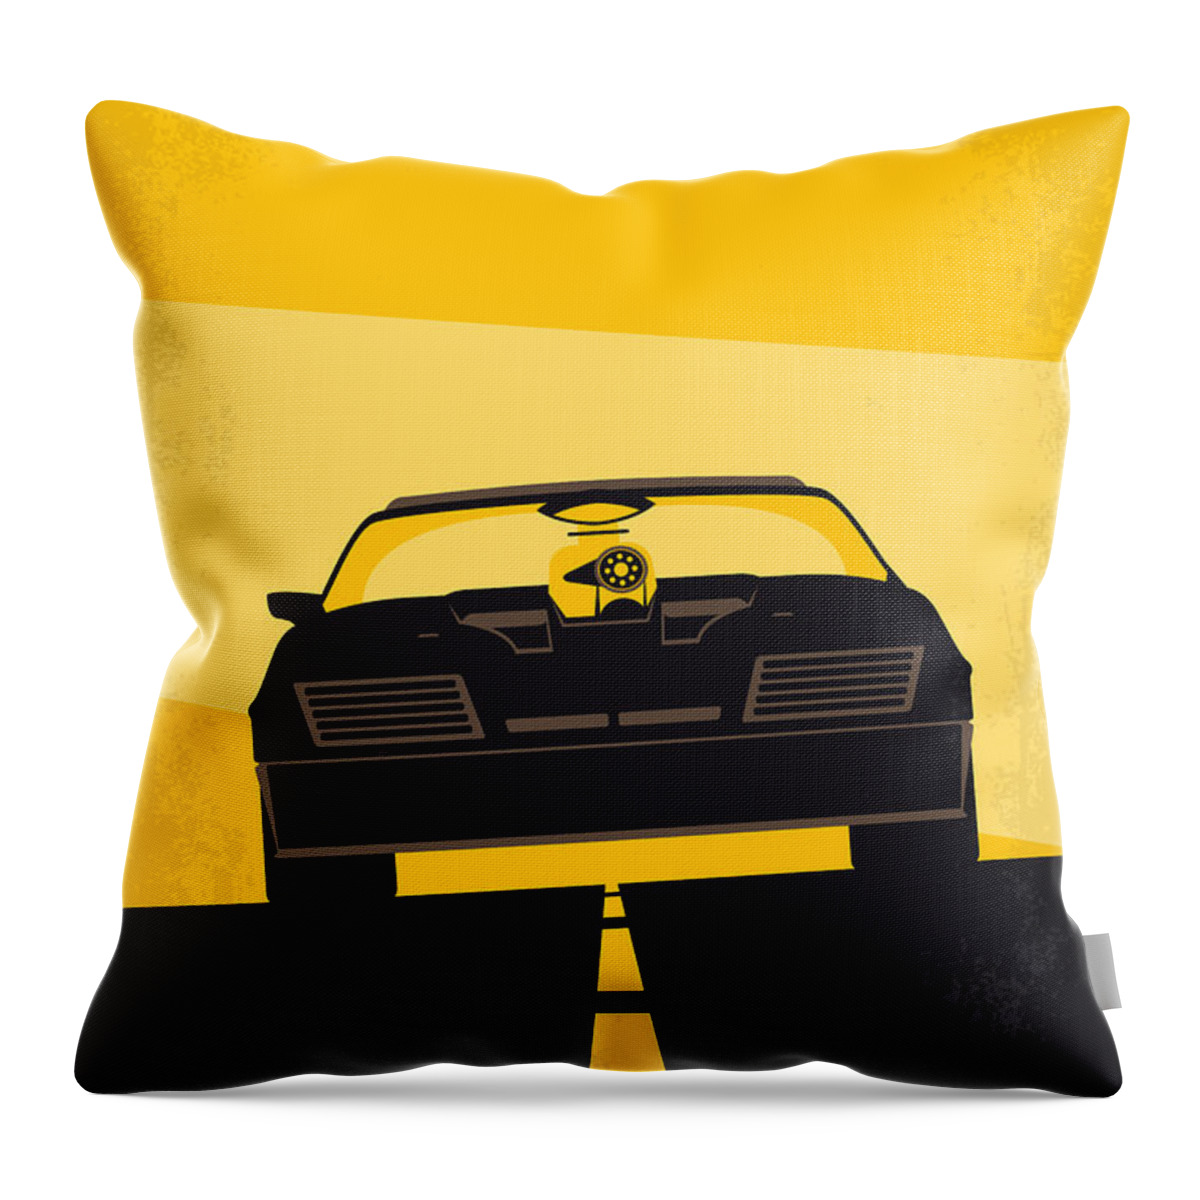 Mad Max Throw Pillow featuring the digital art No051 My Mad Max minimal movie poster by Chungkong Art